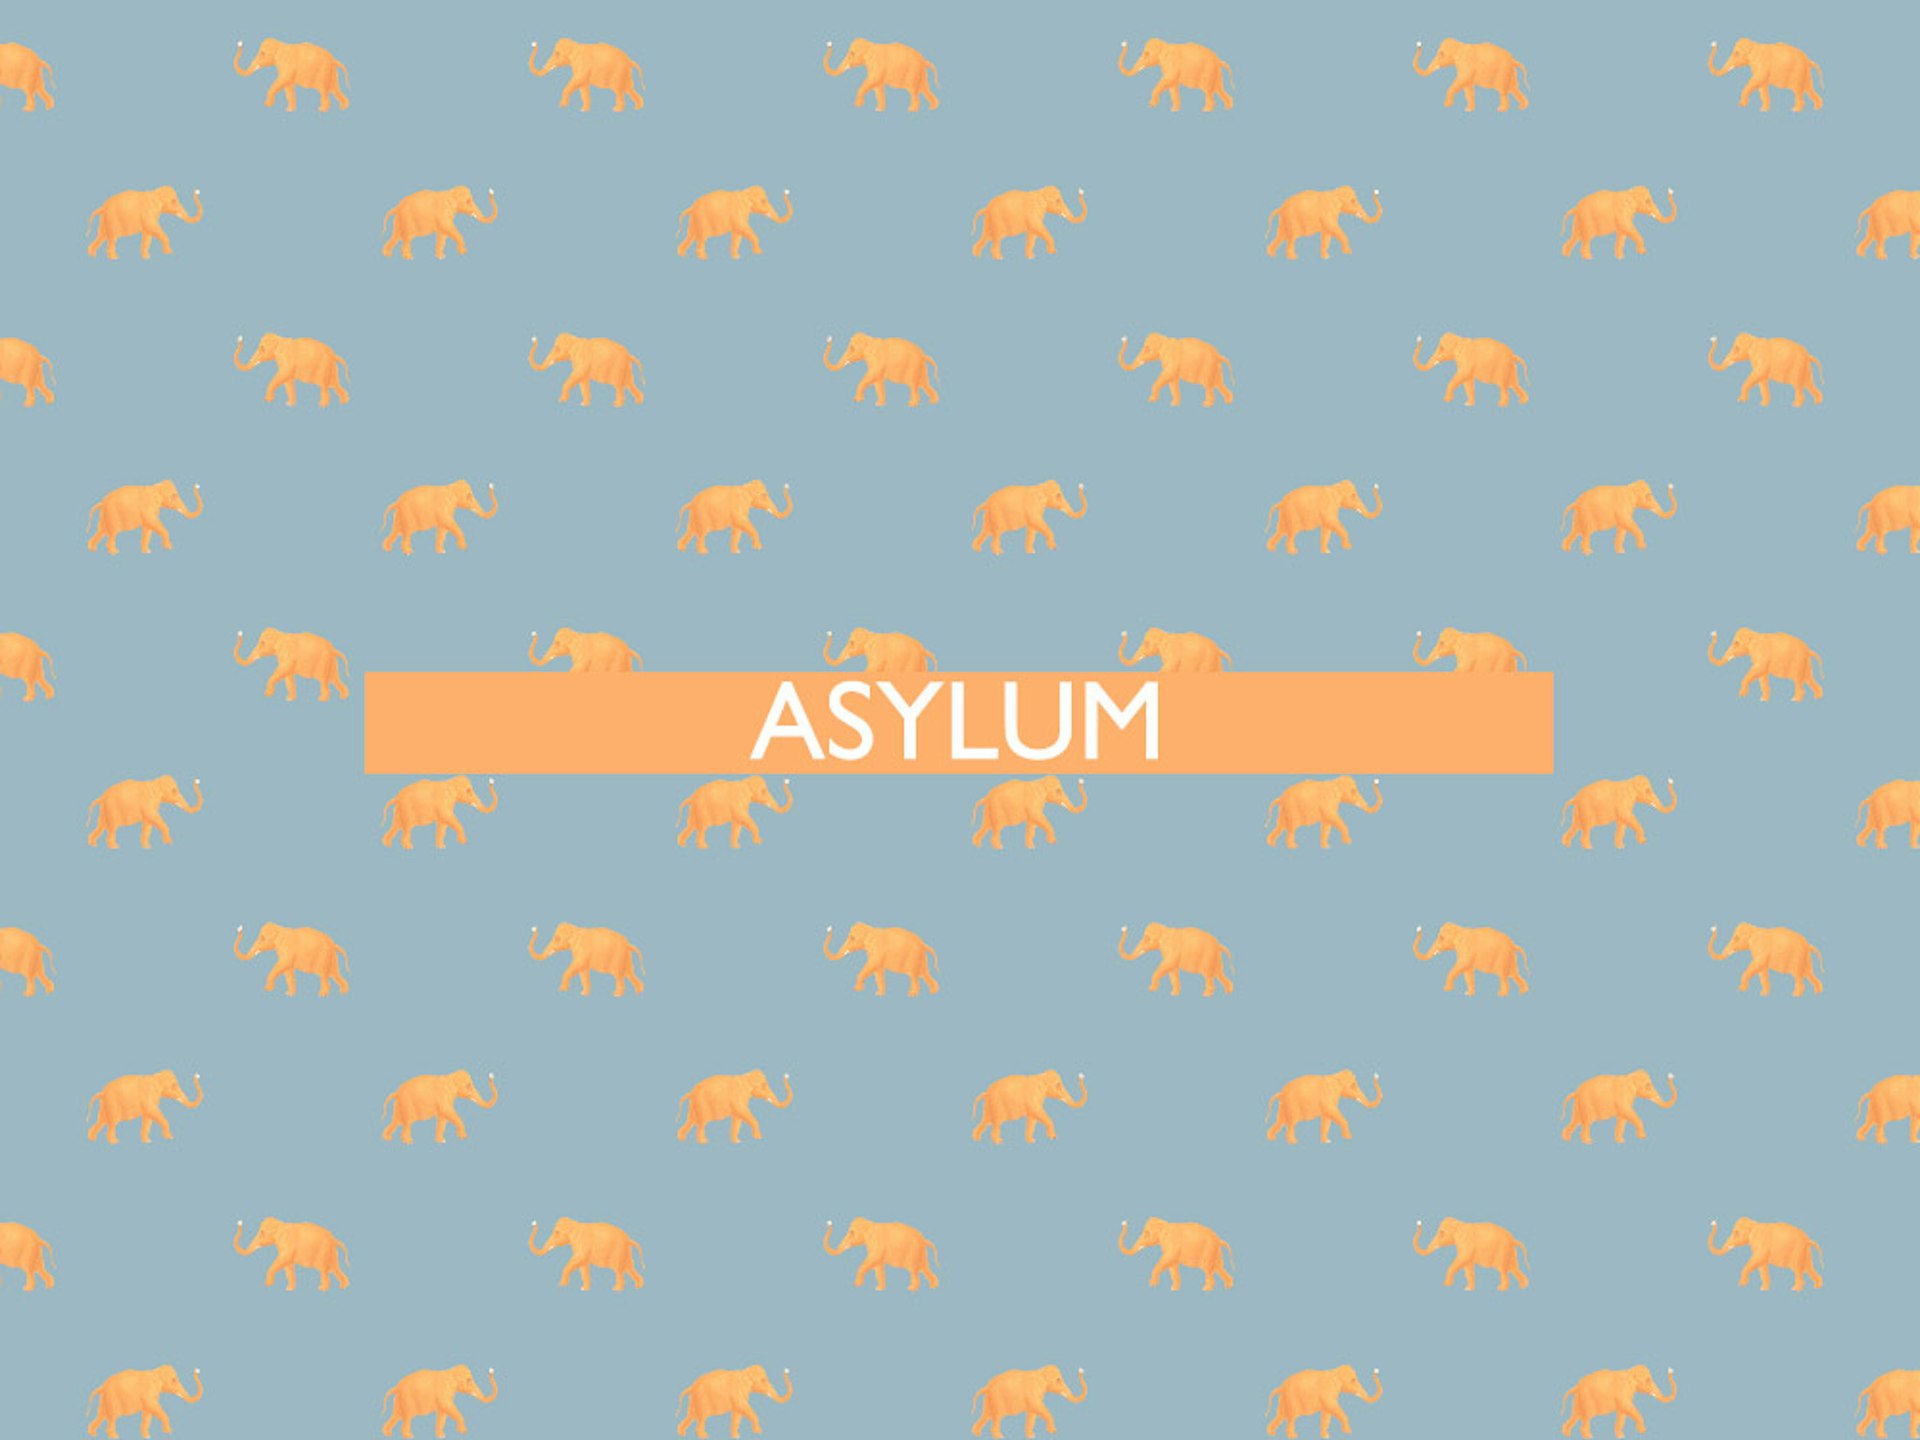 The 18th of all EU-r rights: asylum and how the Charter contributes